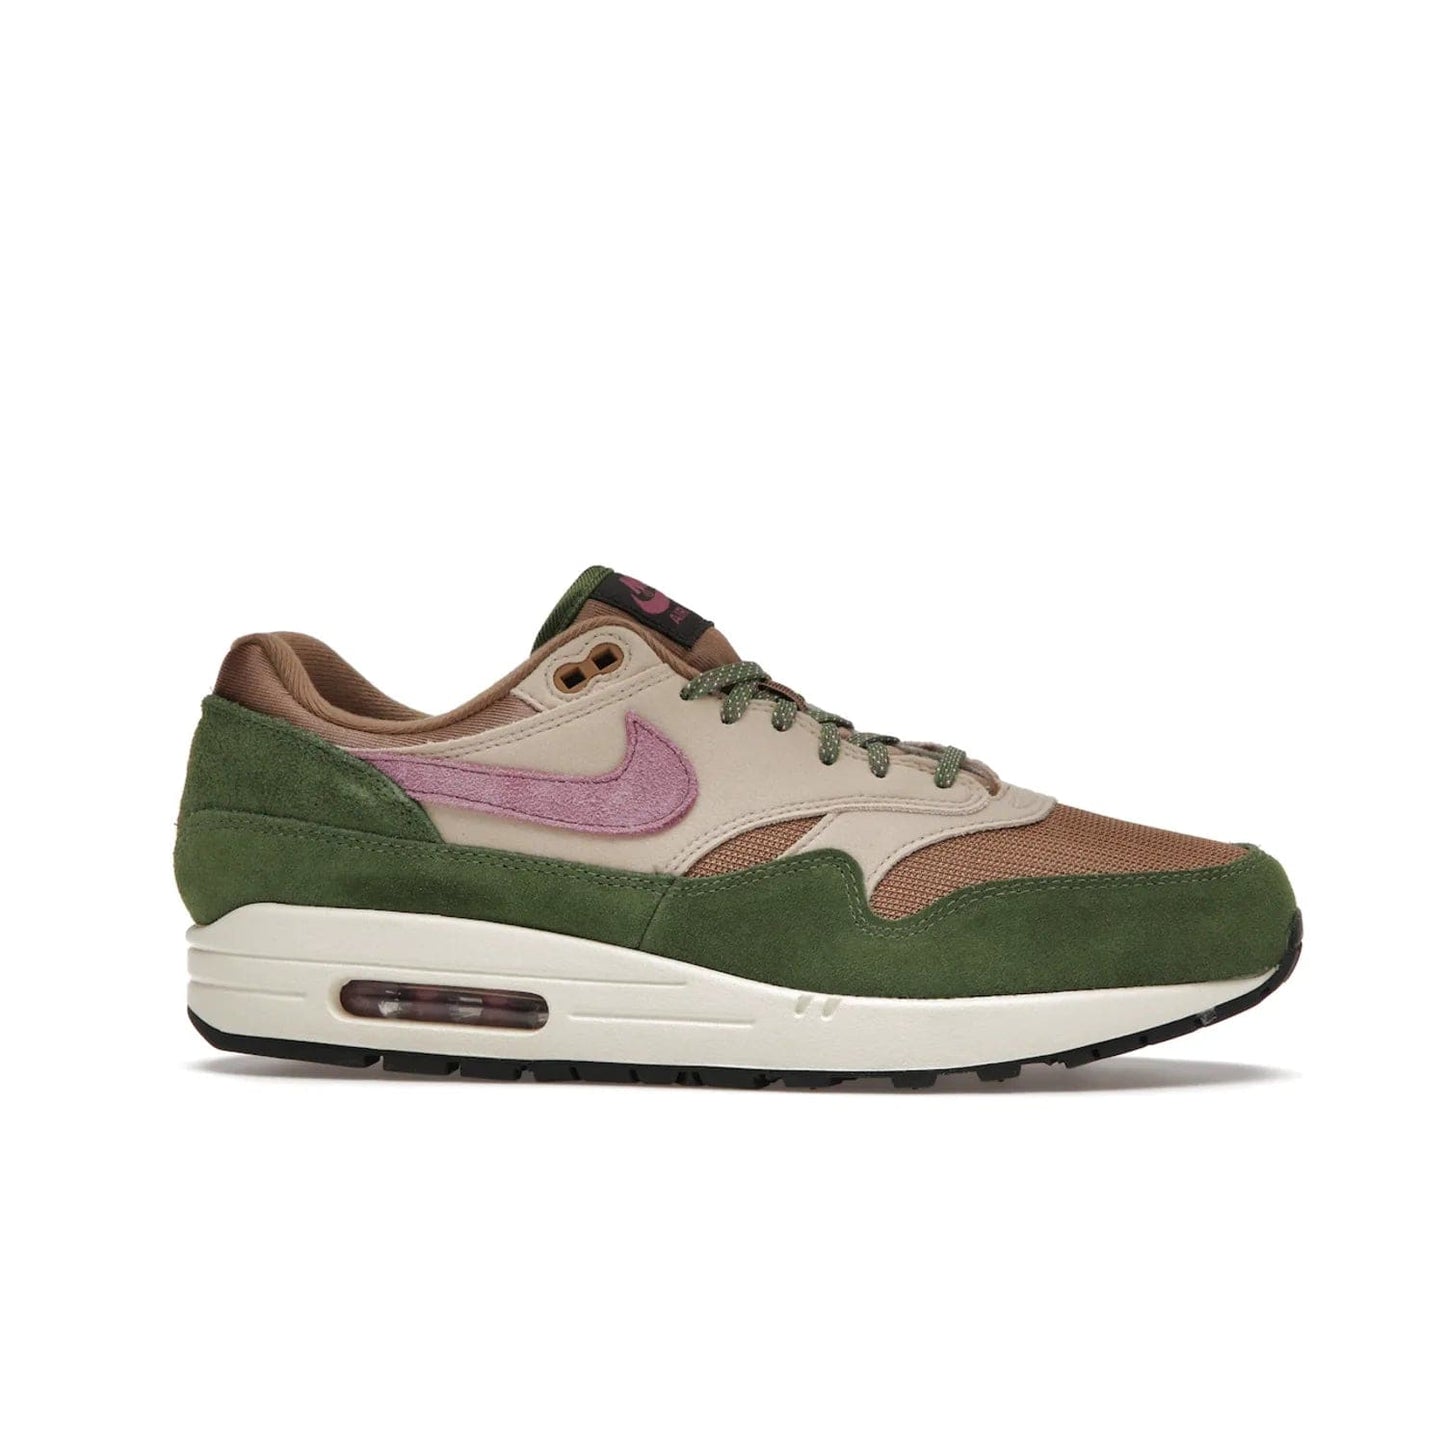 Nike Air Max 1 SH Treeline - Image 2 - Only at www.BallersClubKickz.com - A classic Nike Air Max 1 SH Treeline with a brown mesh upper, taupe Durabuck overlays, and hairy green suede details. Light Bordeaux Swoosh and woven tongue label for a pop of color. Released in May 2022. Perfect for any outfit and sure to impress.